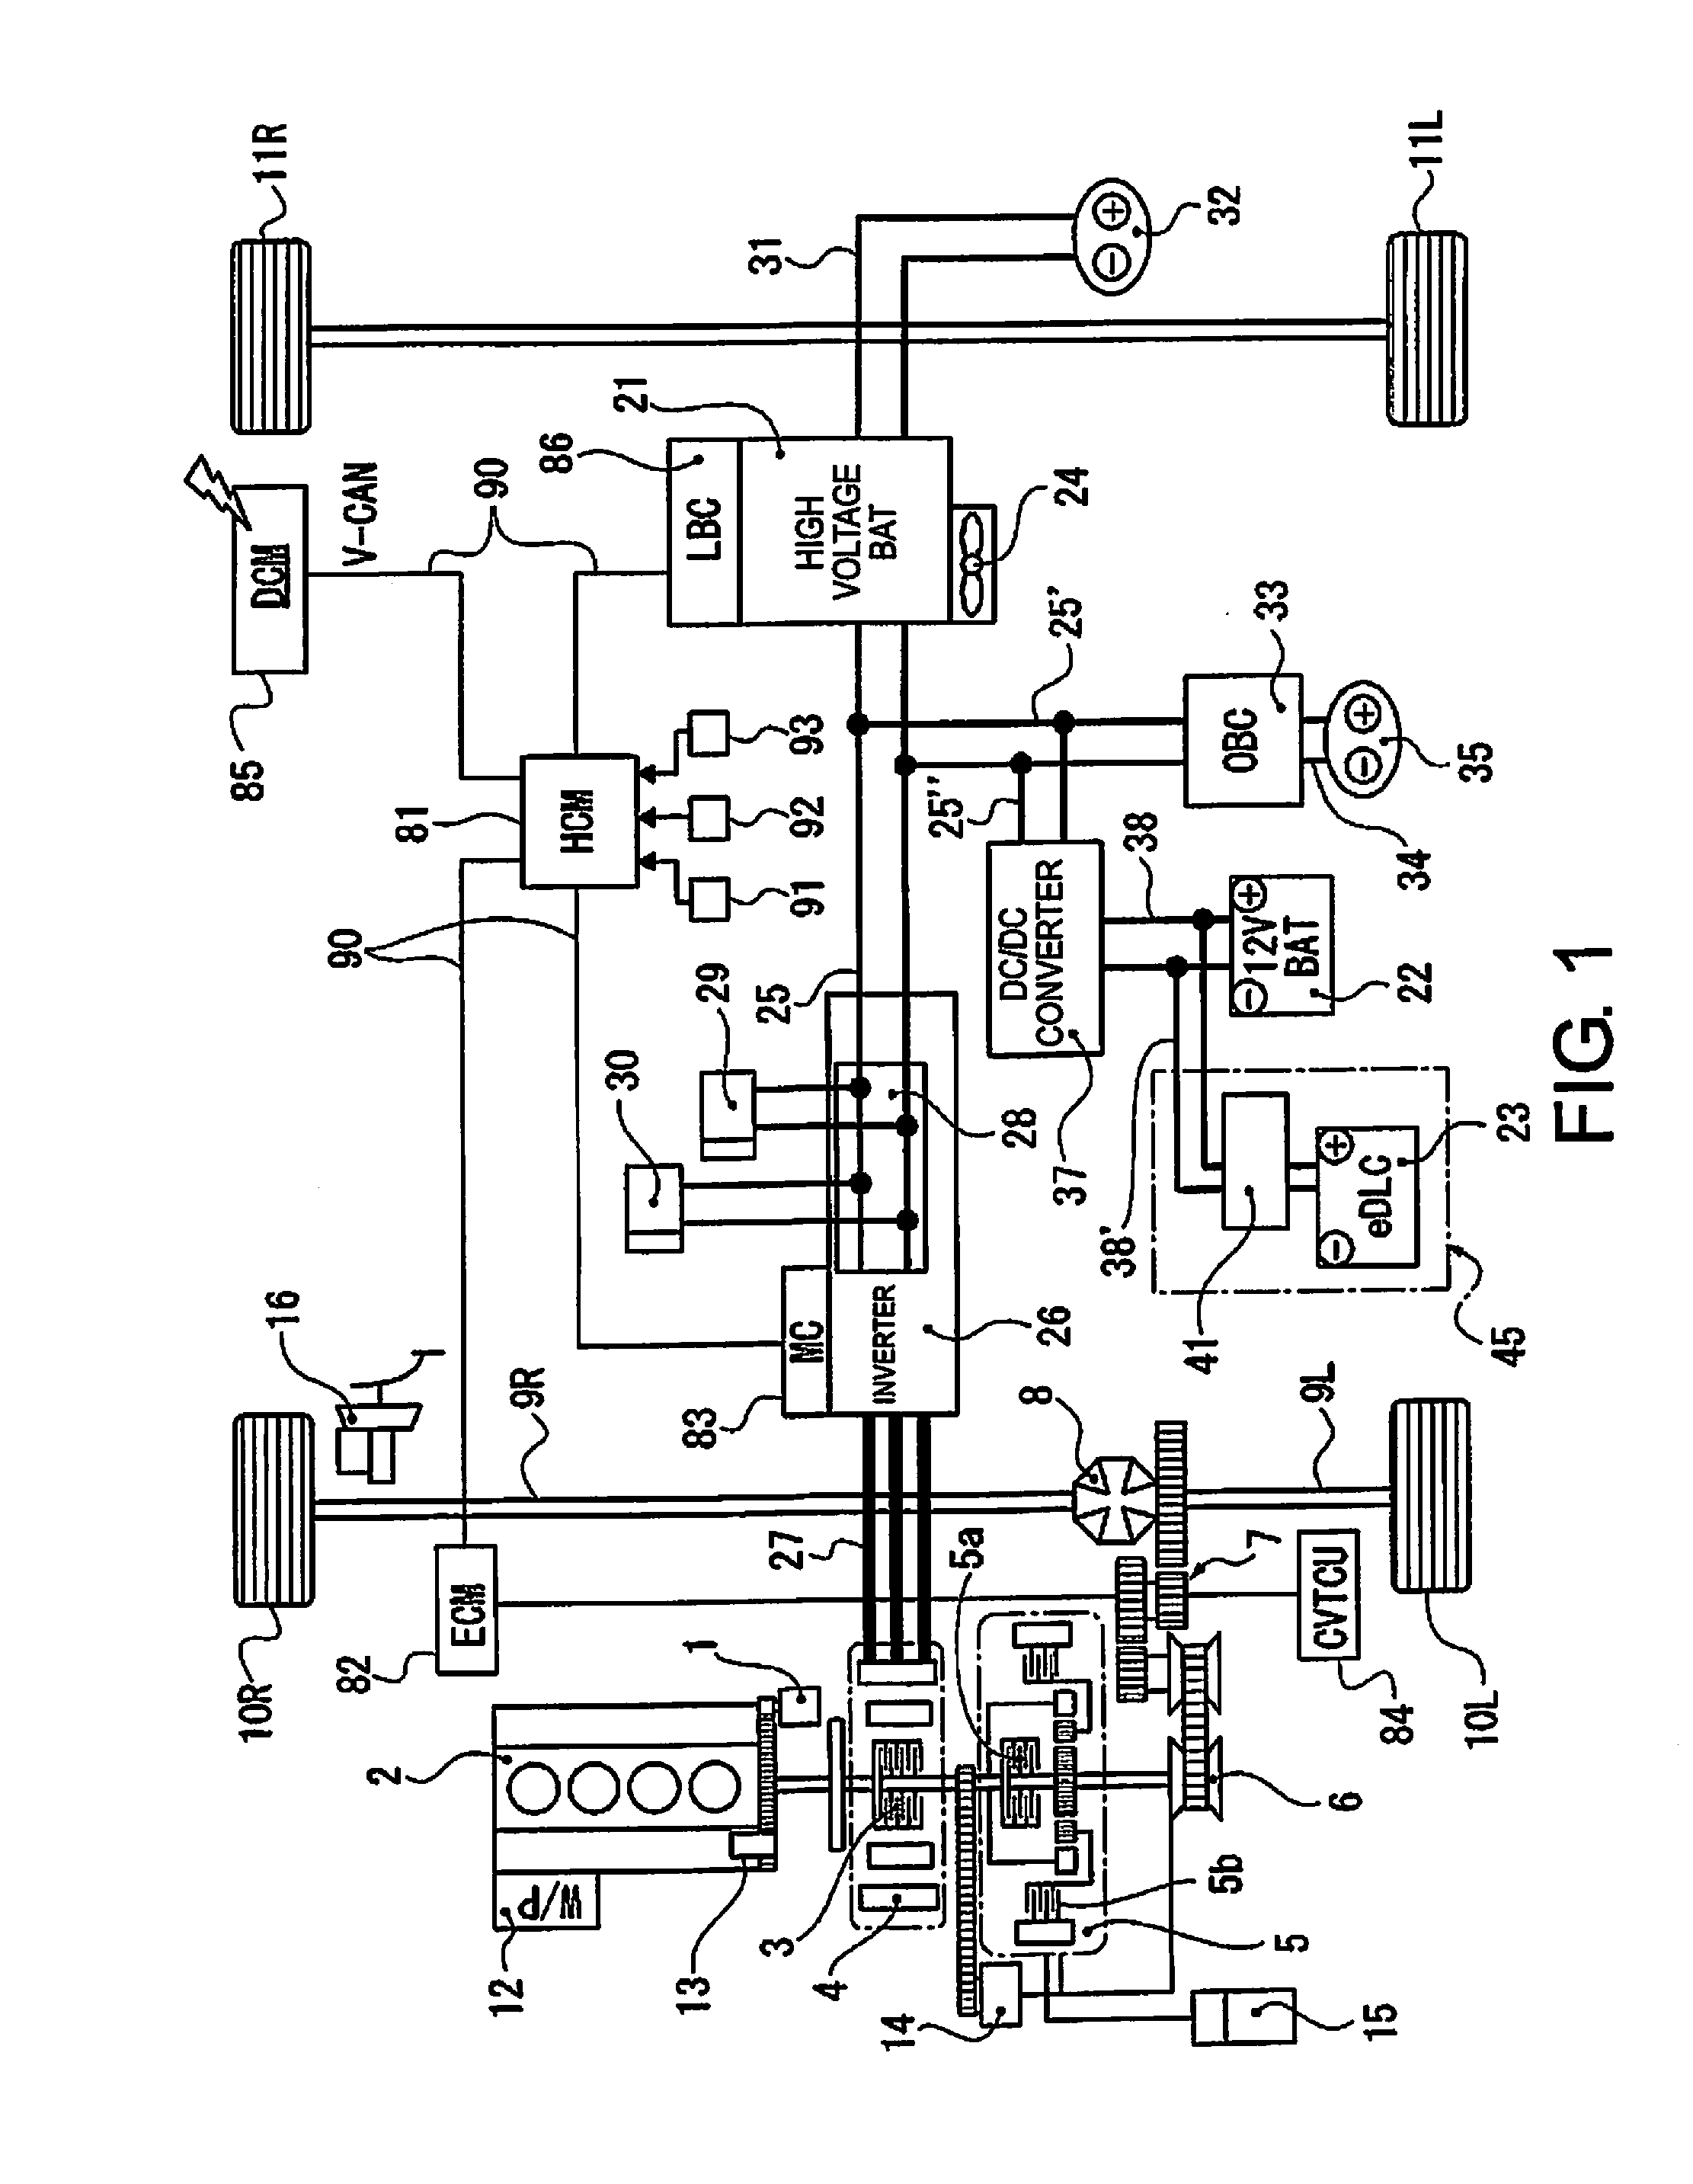 Control system for a plug-in hybrid vehicle